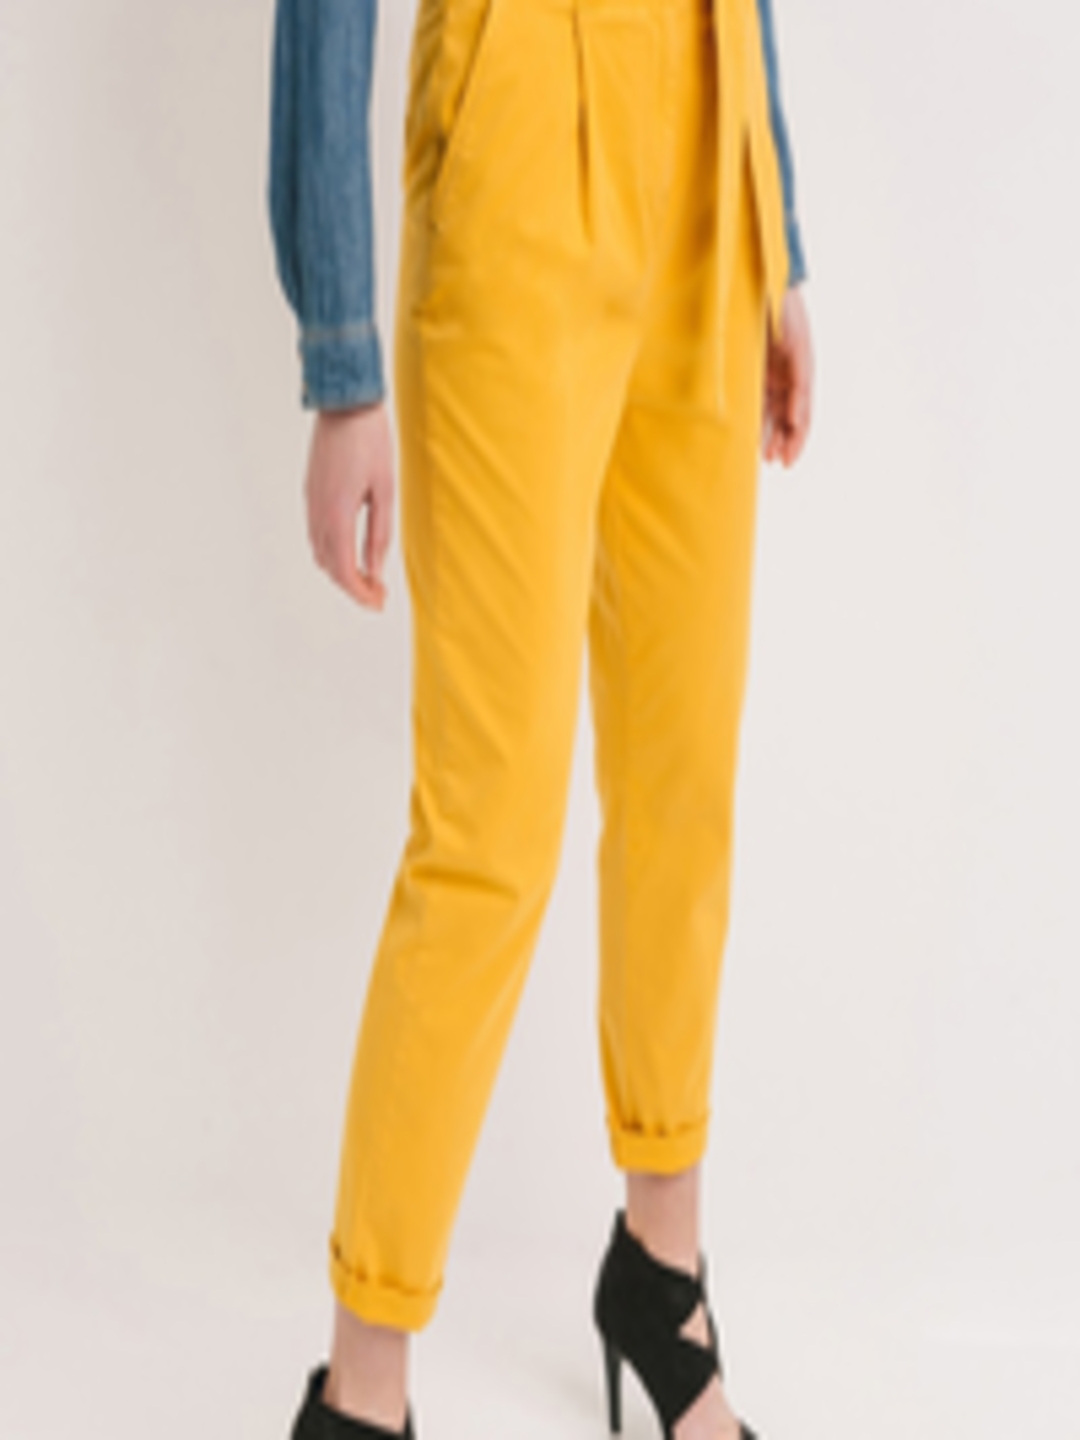 Buy Promod Yellow Trousers - Trousers for Women 1858645 | Myntra